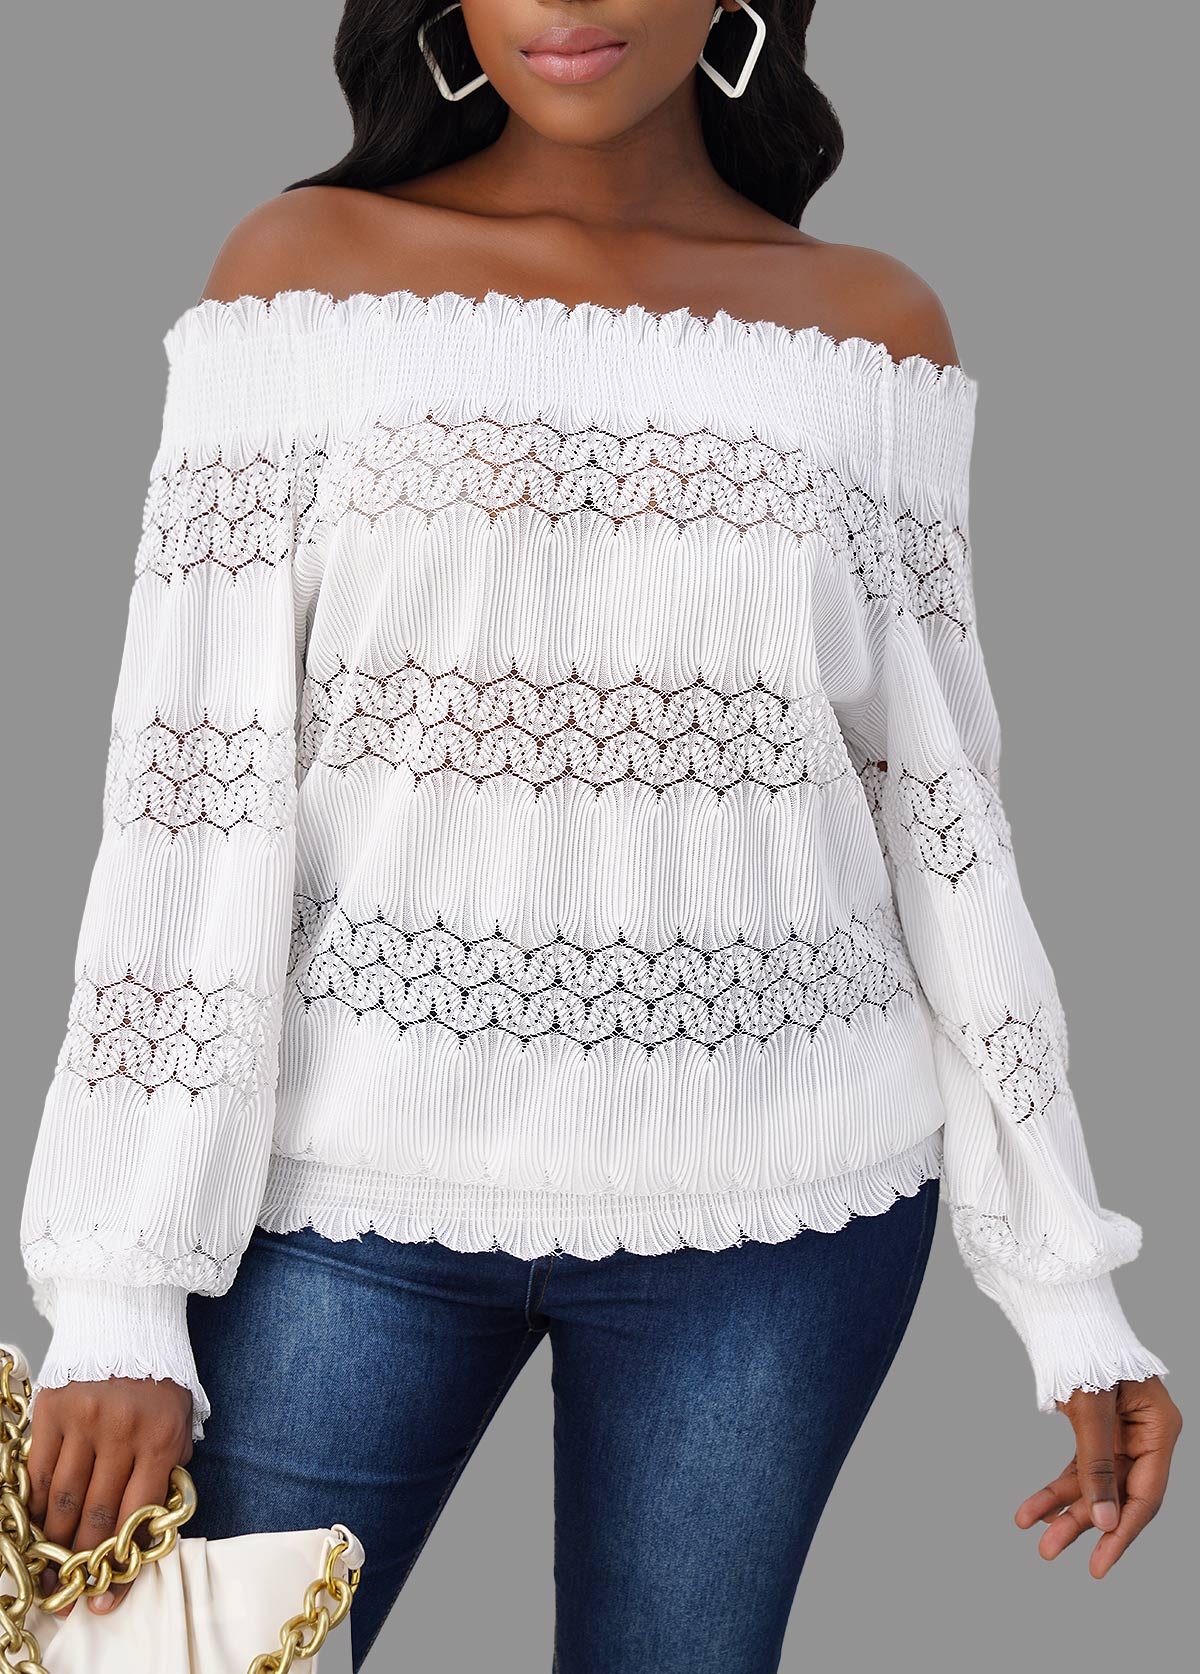 Lace Stitching White Off Shoulder Blouse